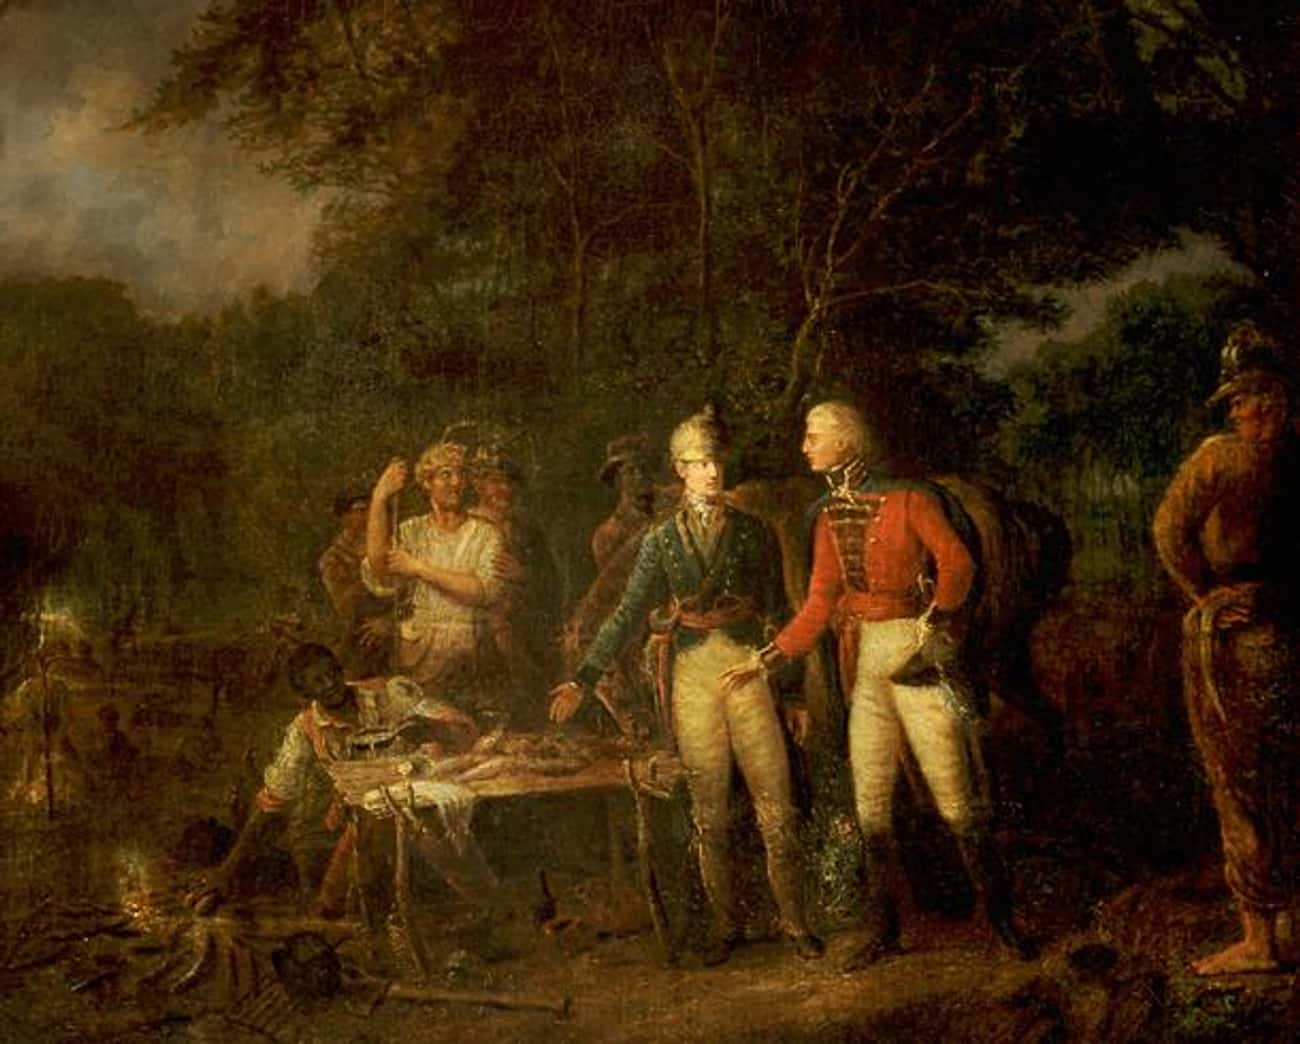 General Marion Inviting a British Officer to Share His Meal